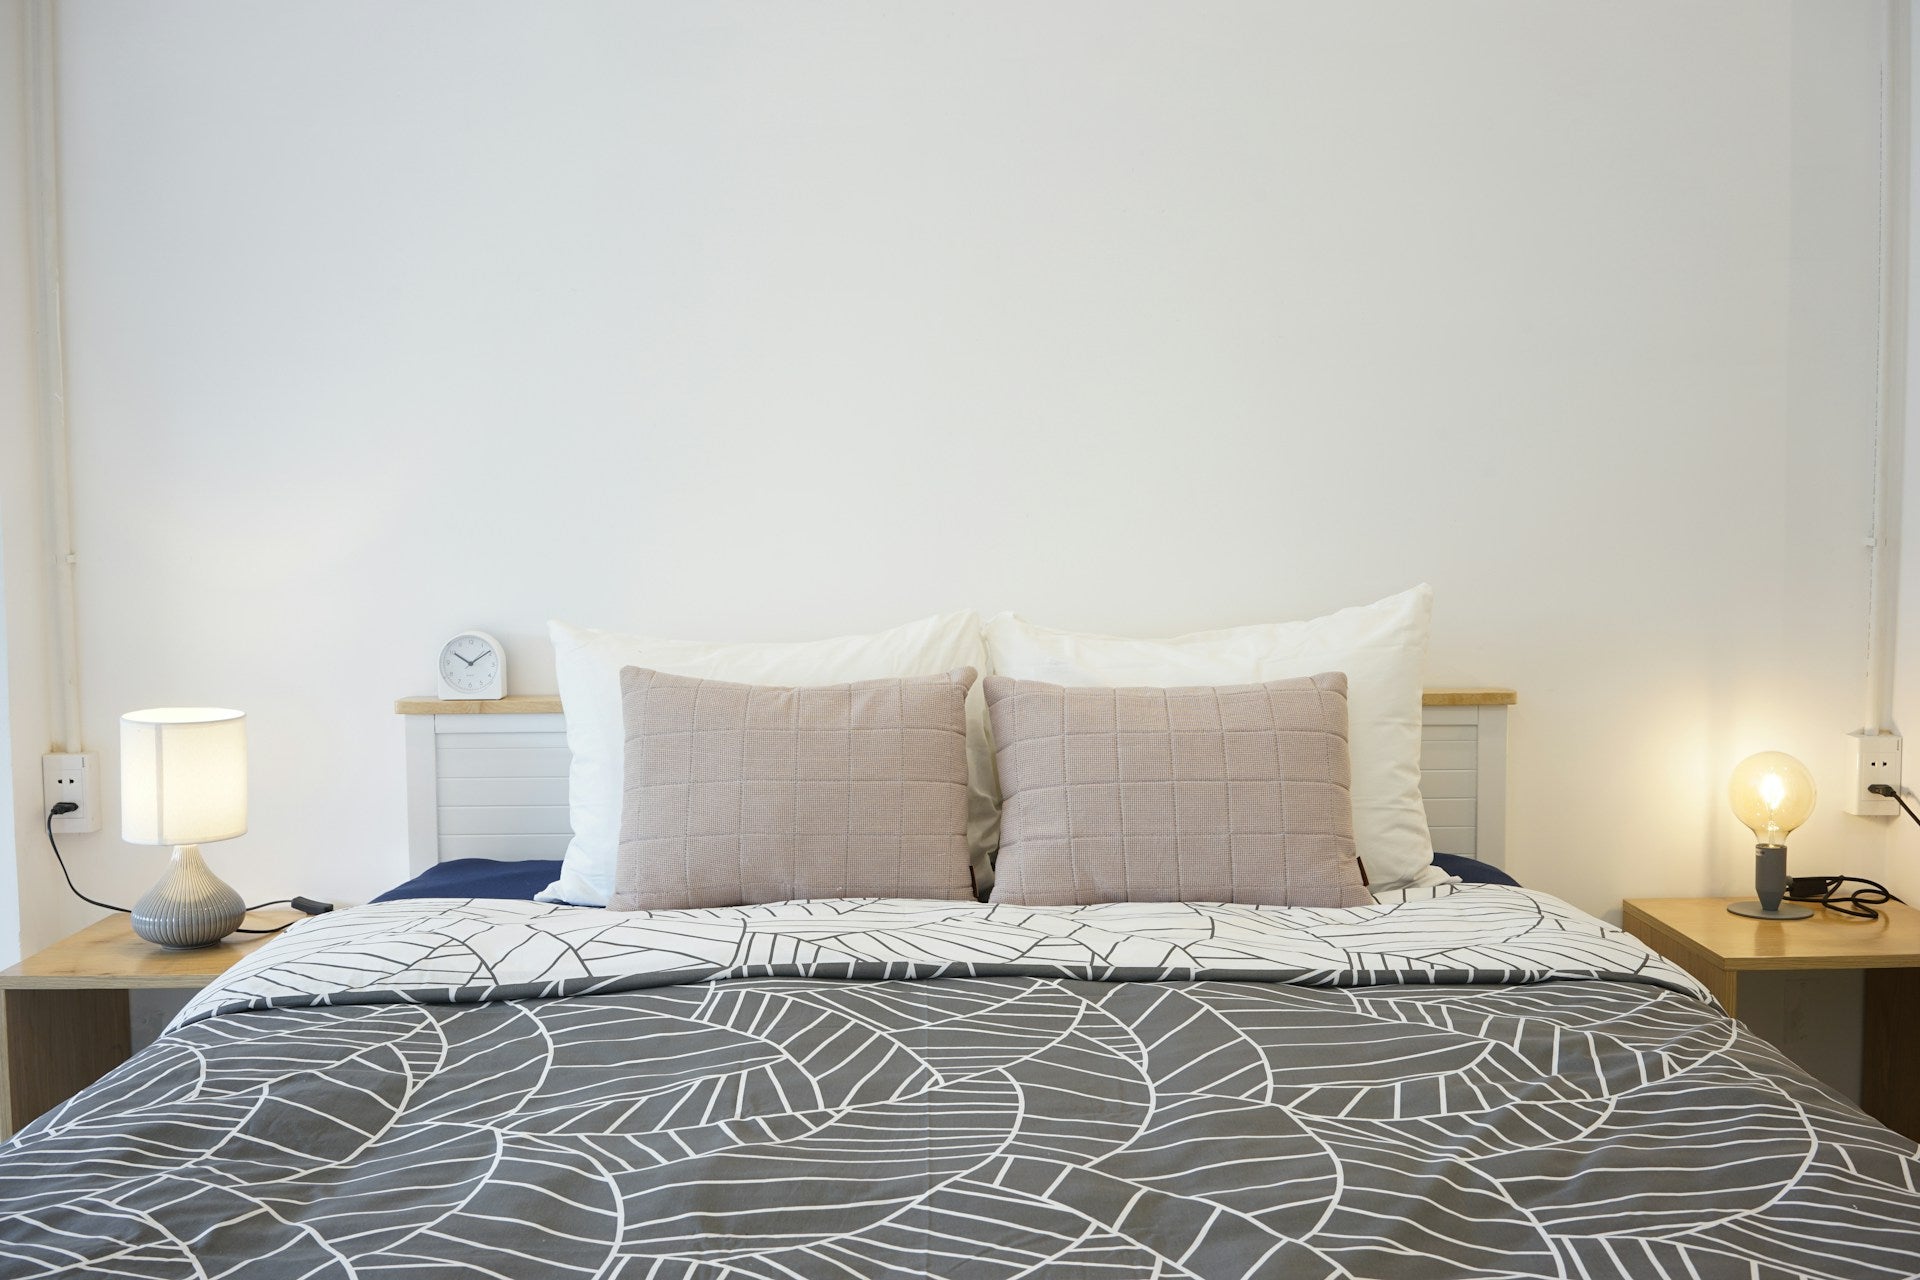 How to Clean and Maintain Memory Foam Pillows